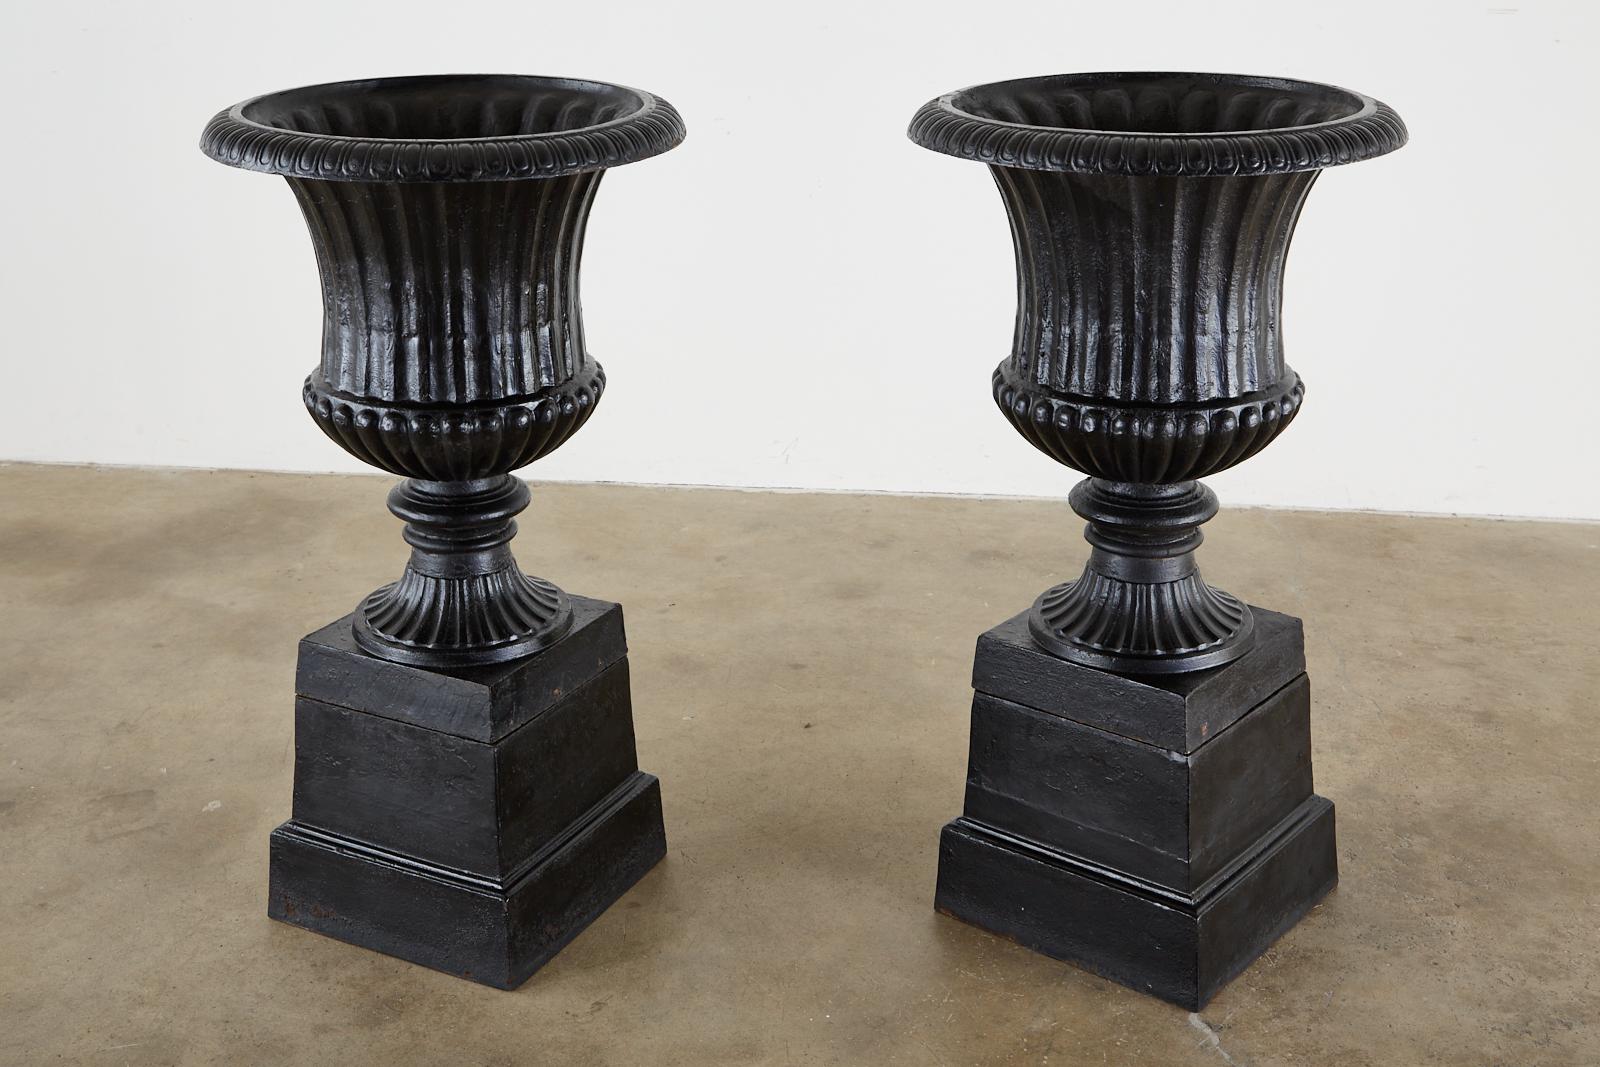 20th Century Pair of English Cast Iron Neoclassical Style Campana Garden Urns